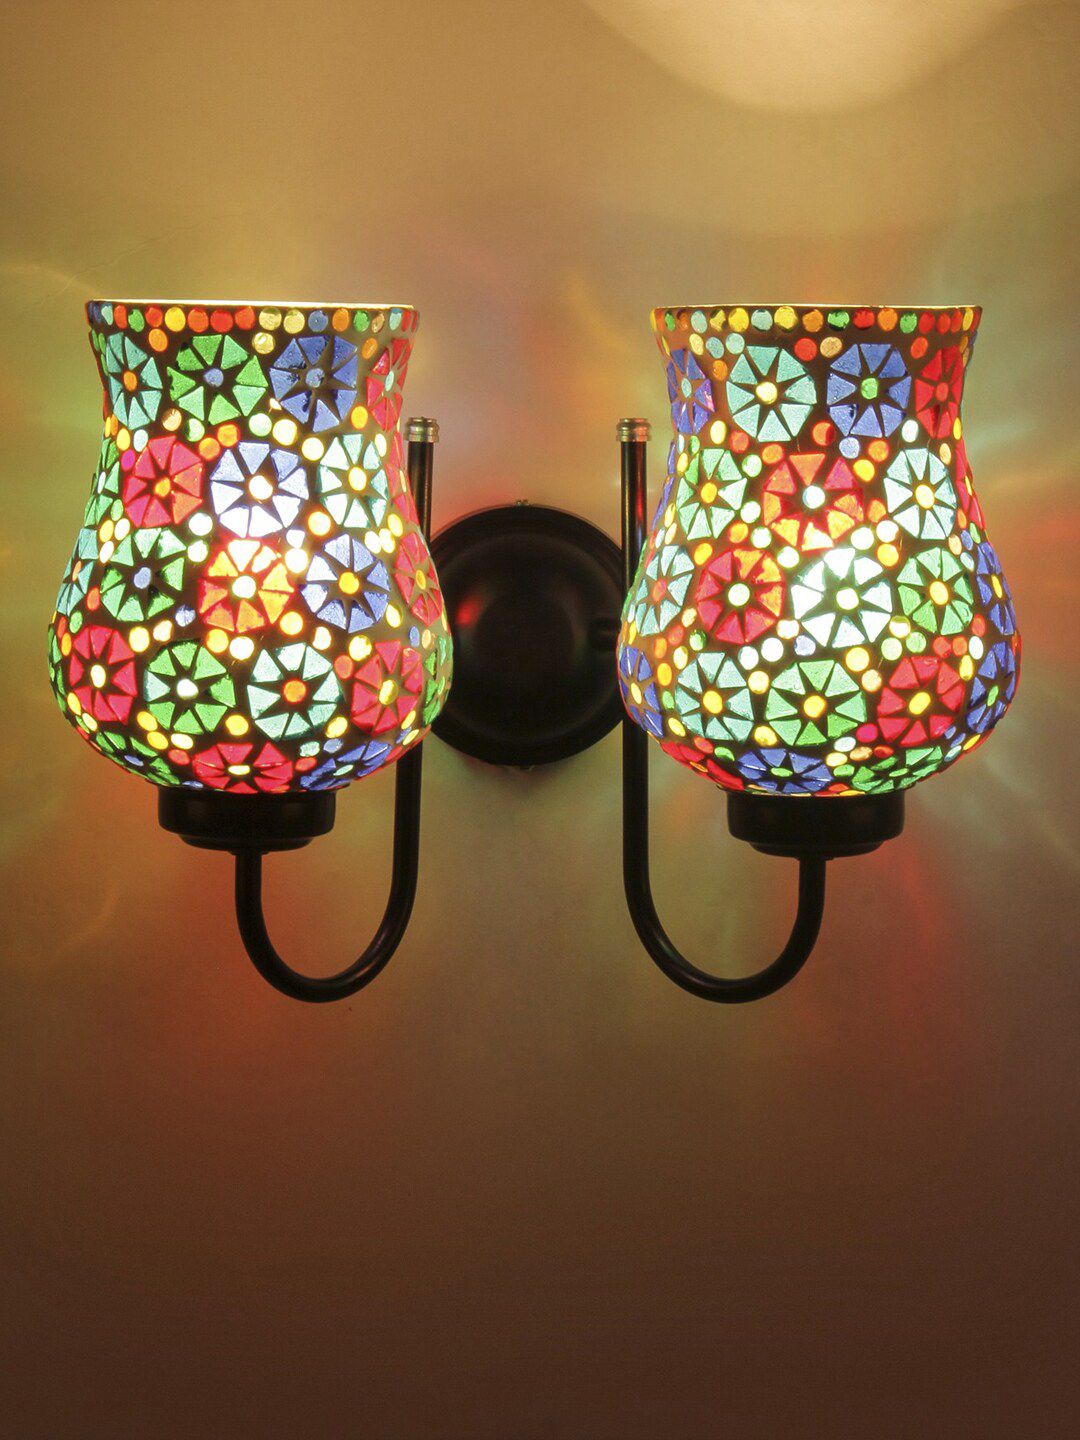 Devansh Multicolored Mosaic Glass Wall Mounted Lamp Price in India